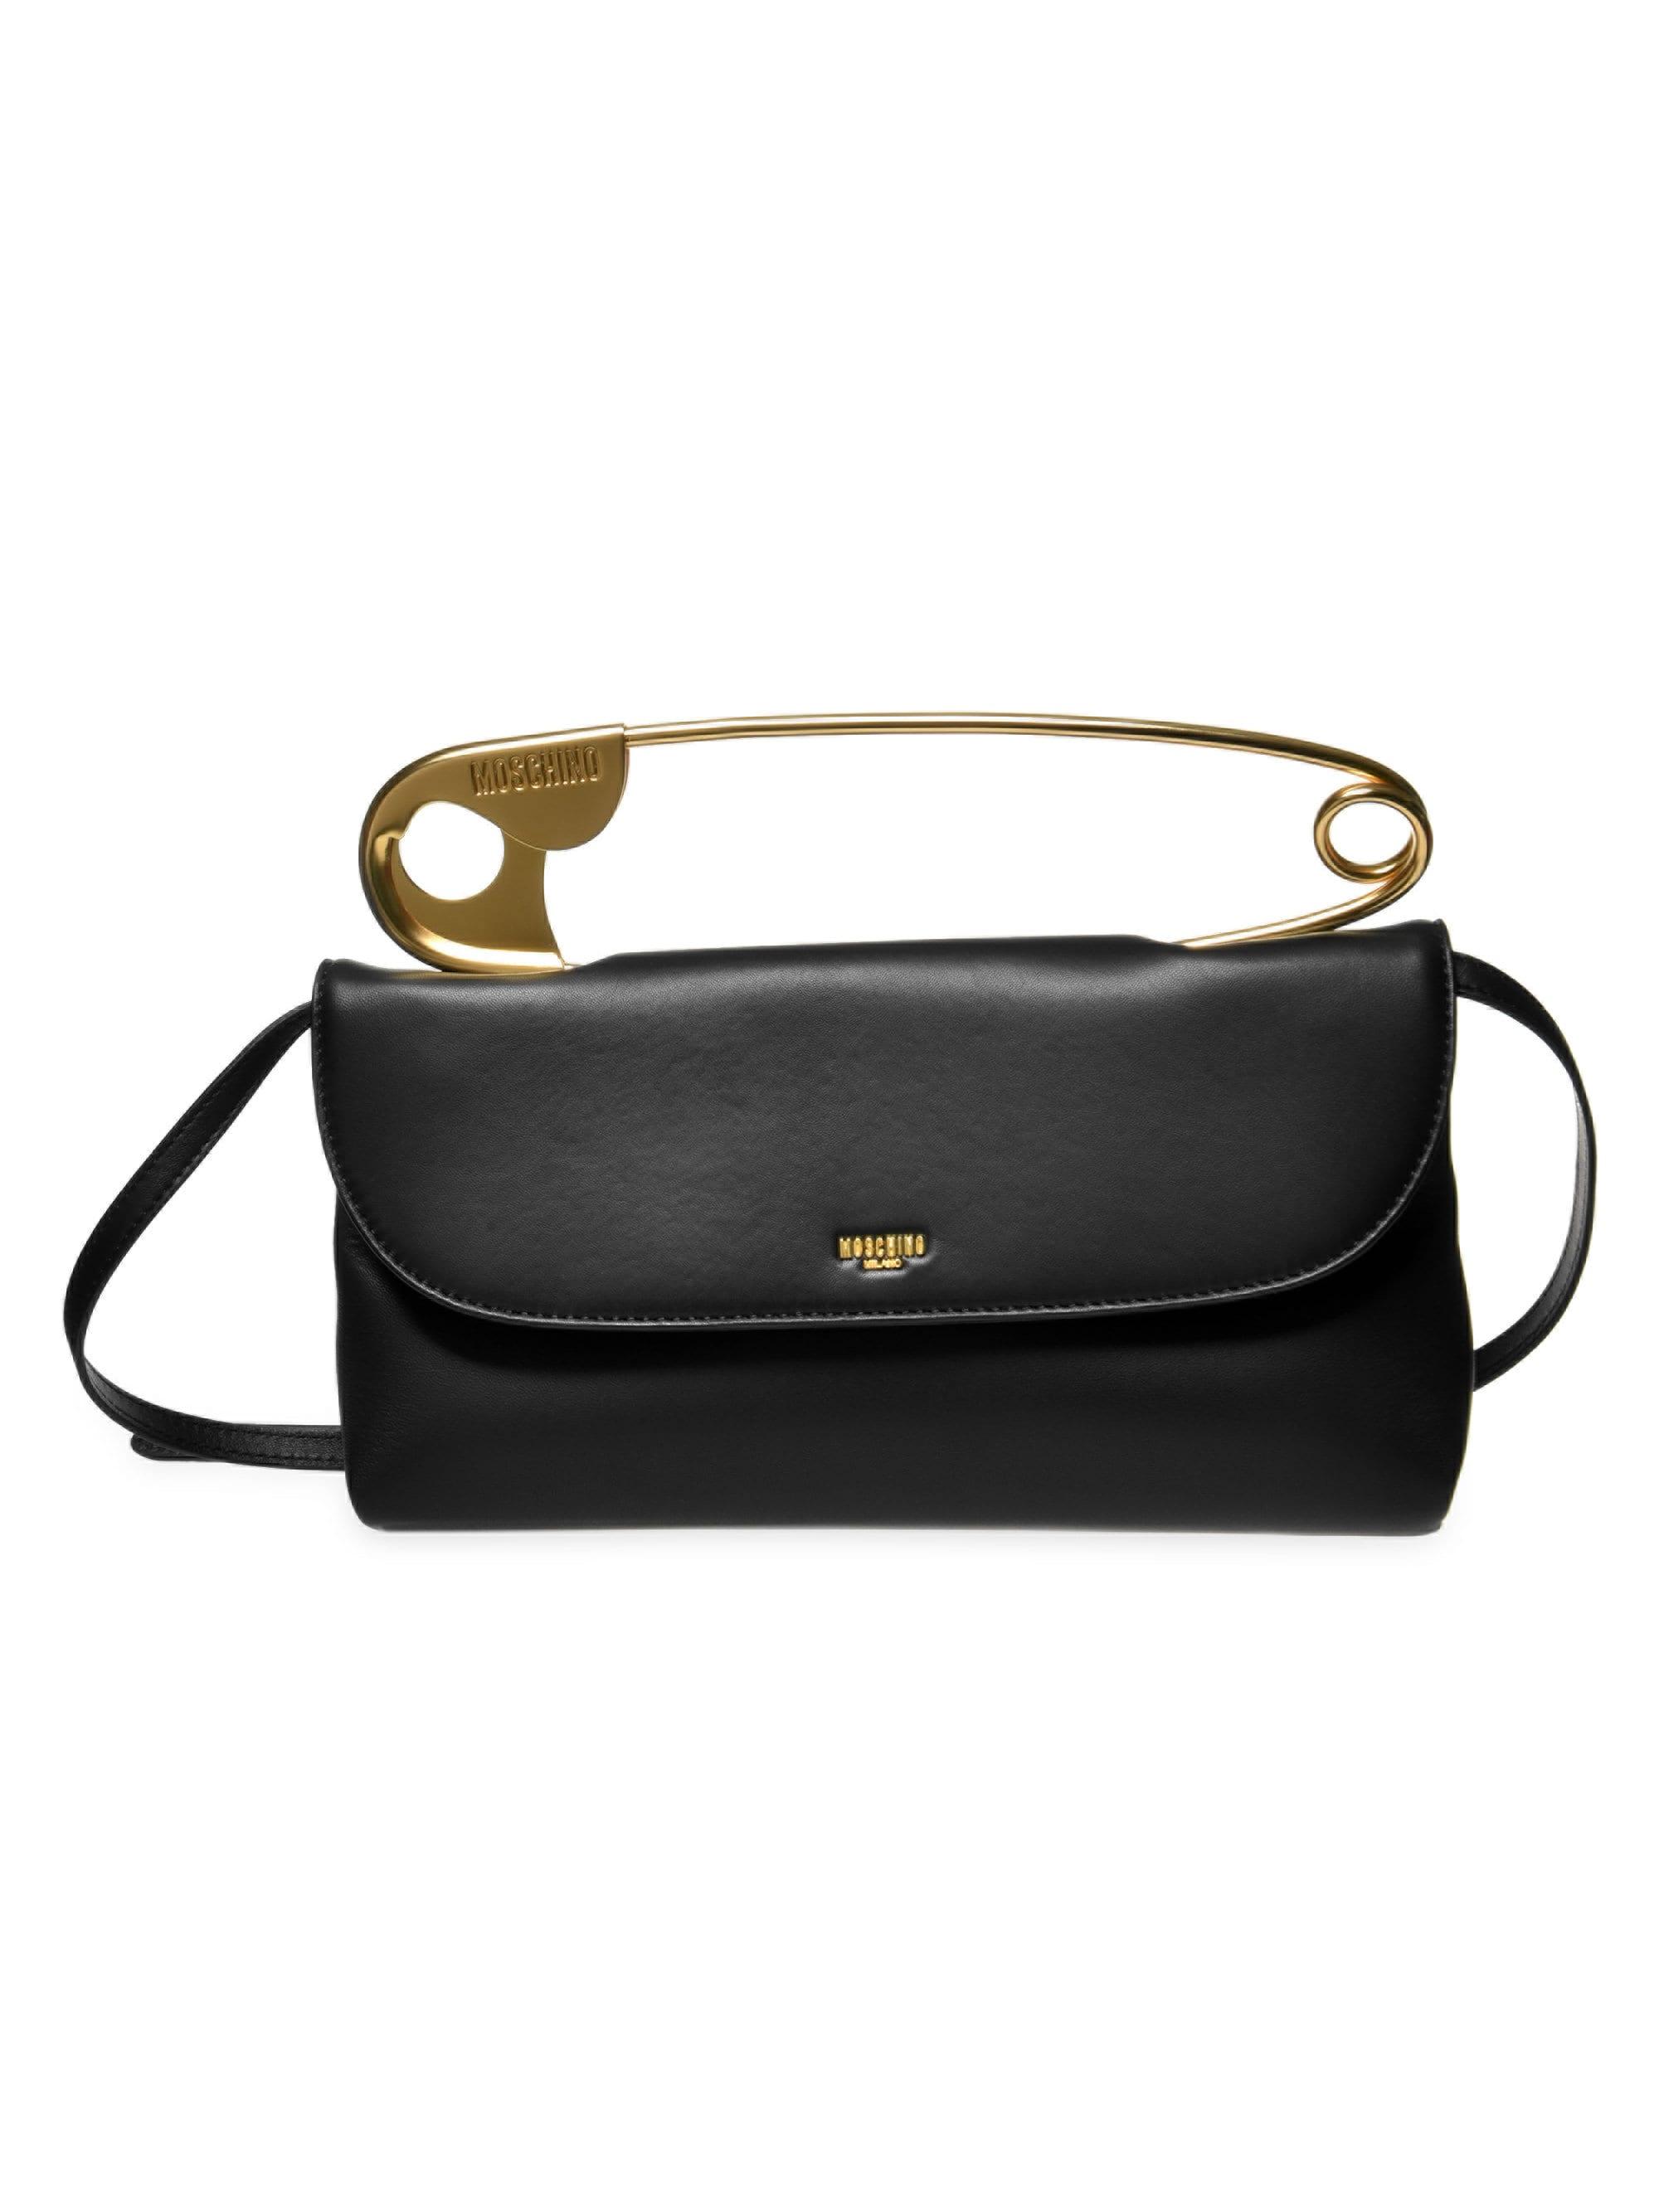 Moschino Safety Pin Bag in Black